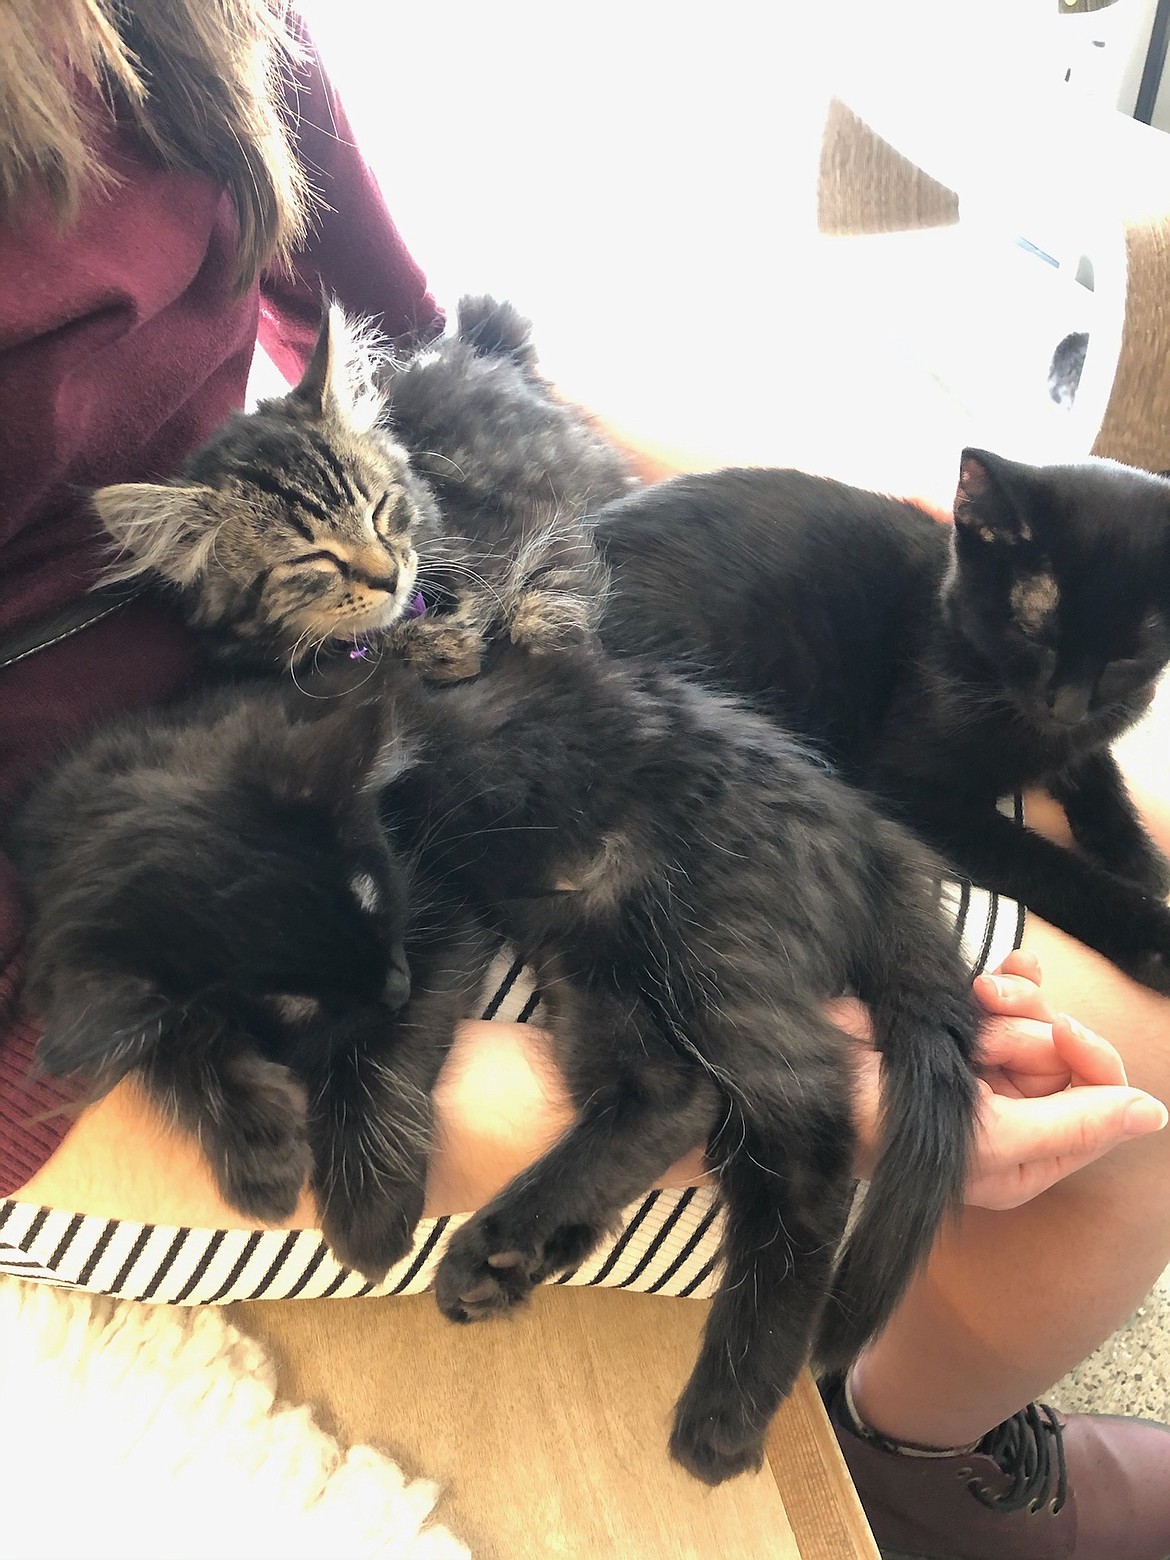 The writer was graced by a lapful of sleepy (and slightly pushy) kittens at Kitty Cantina, Spokane’s cat cafe, last Saturday.